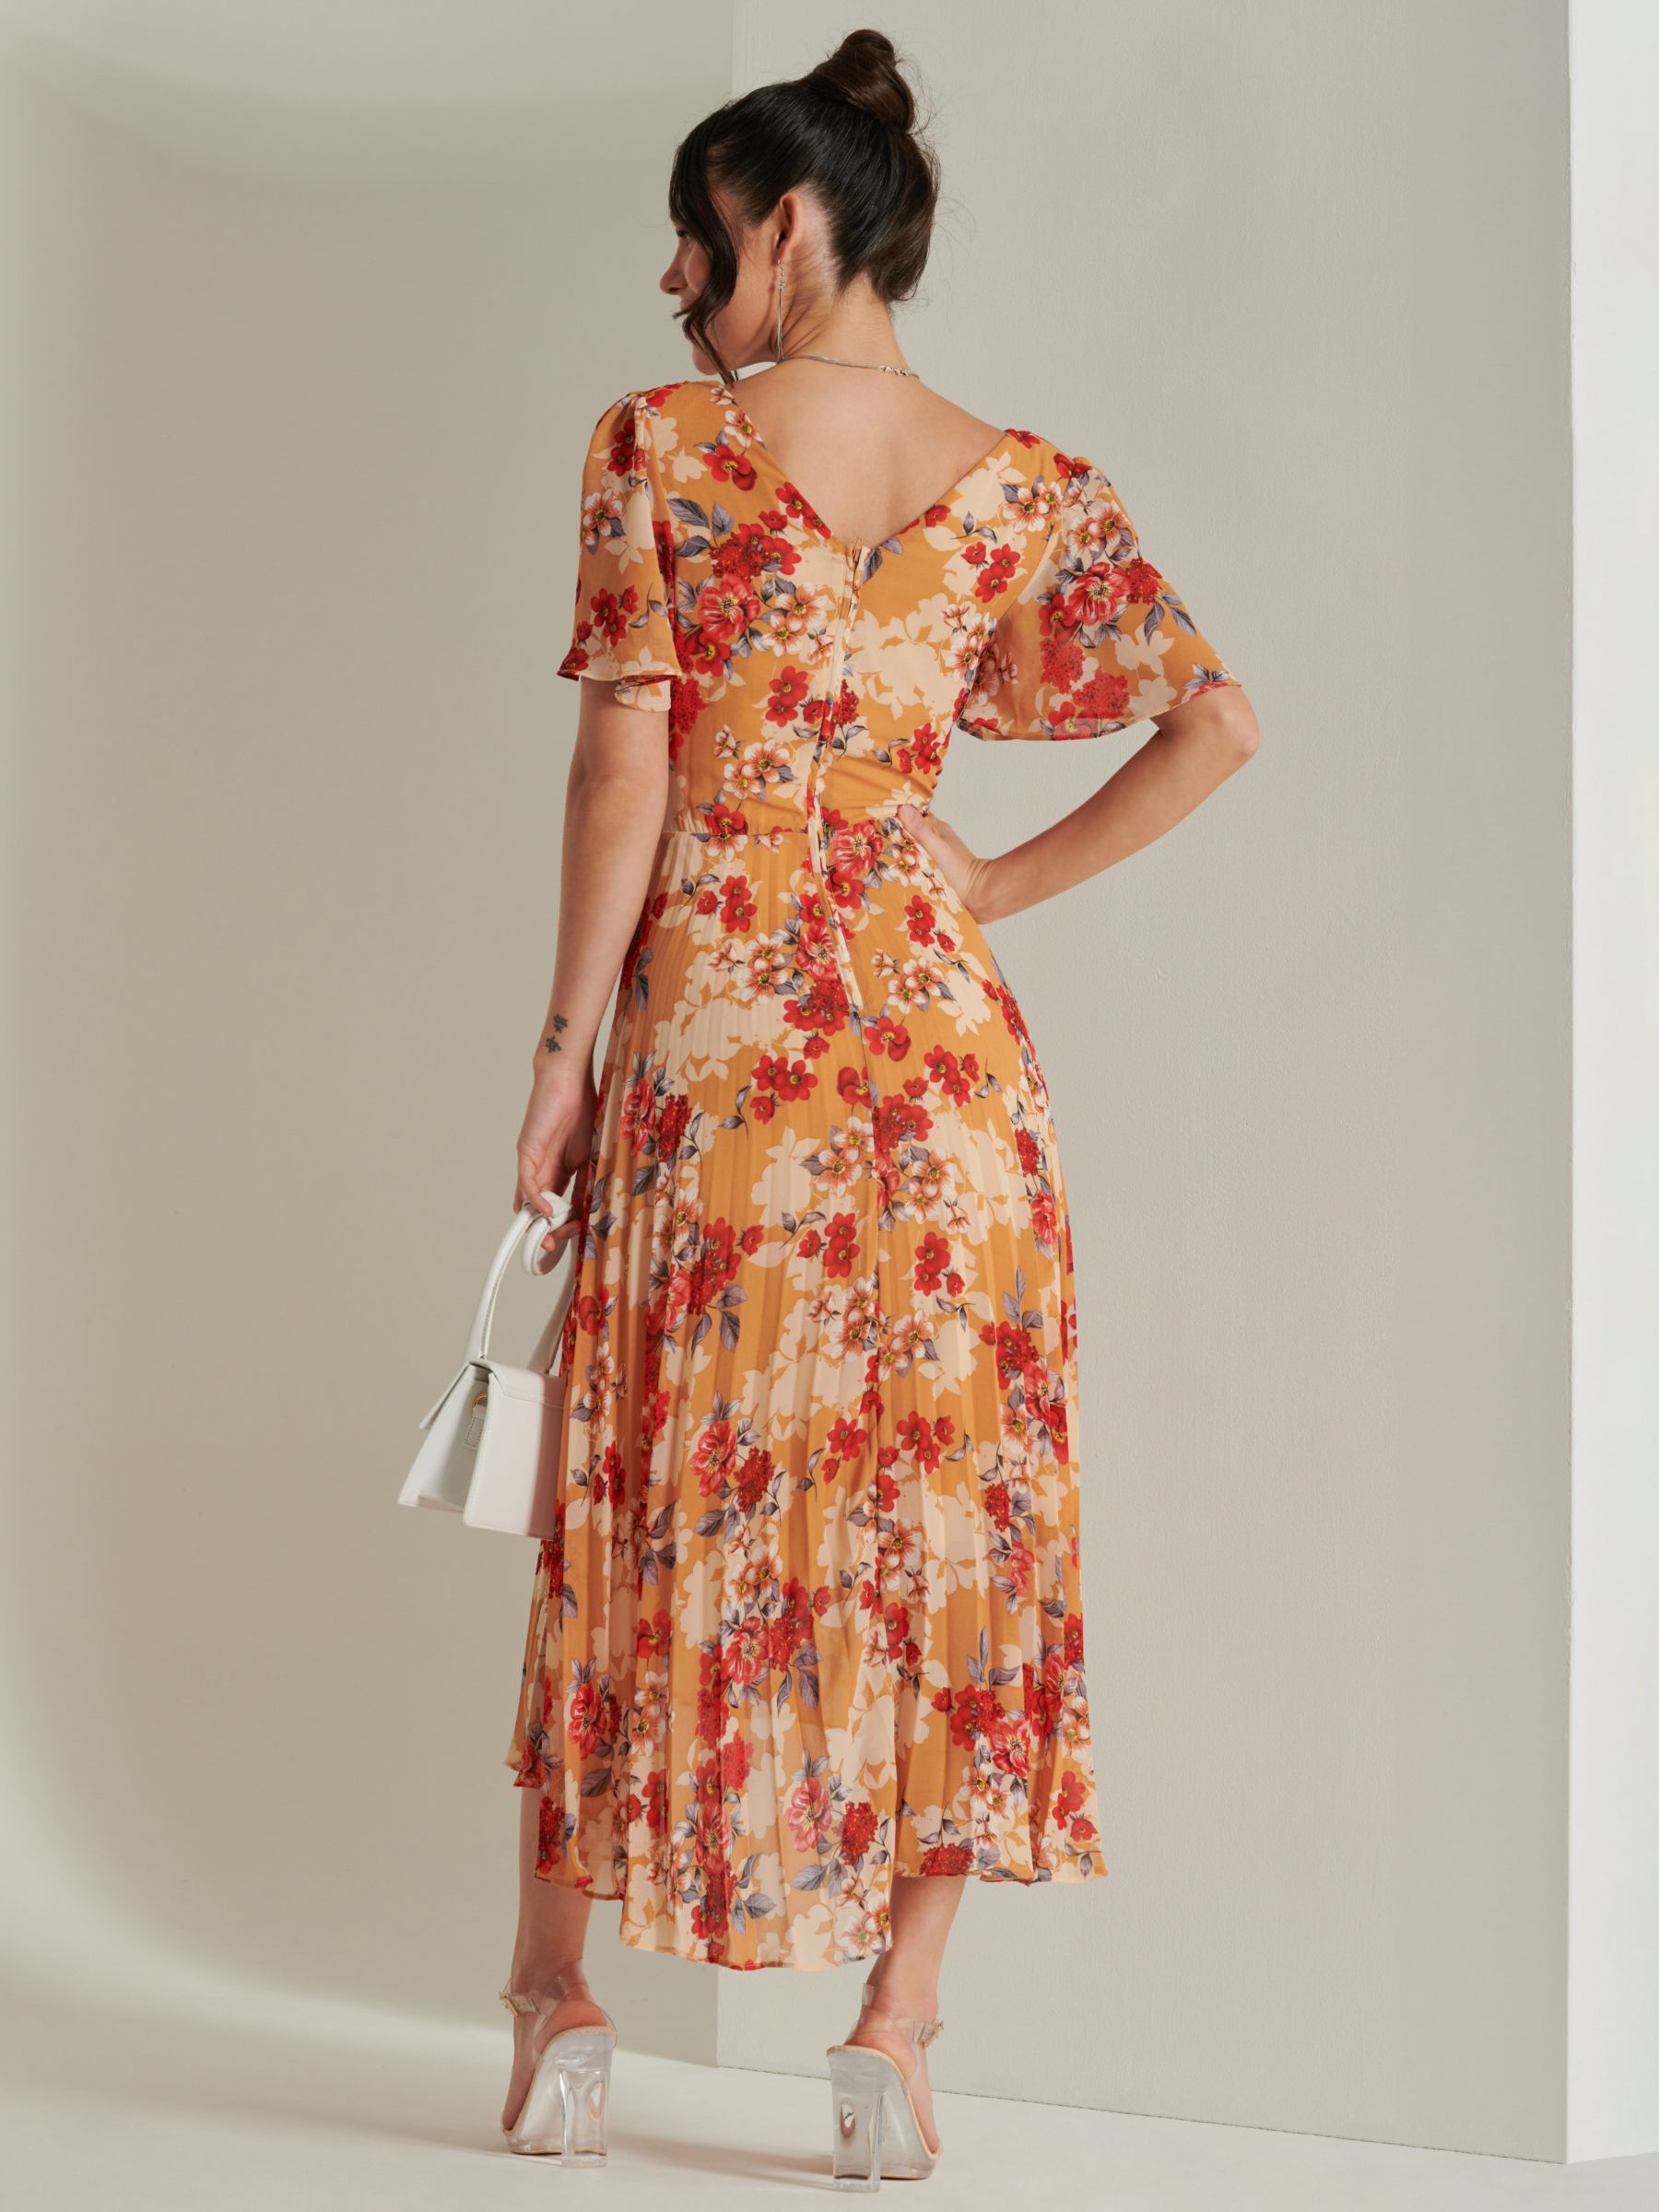 Buy Jolie Moi Pleated Chiffon Maxi Dress, Red Floral Online at johnlewis.com